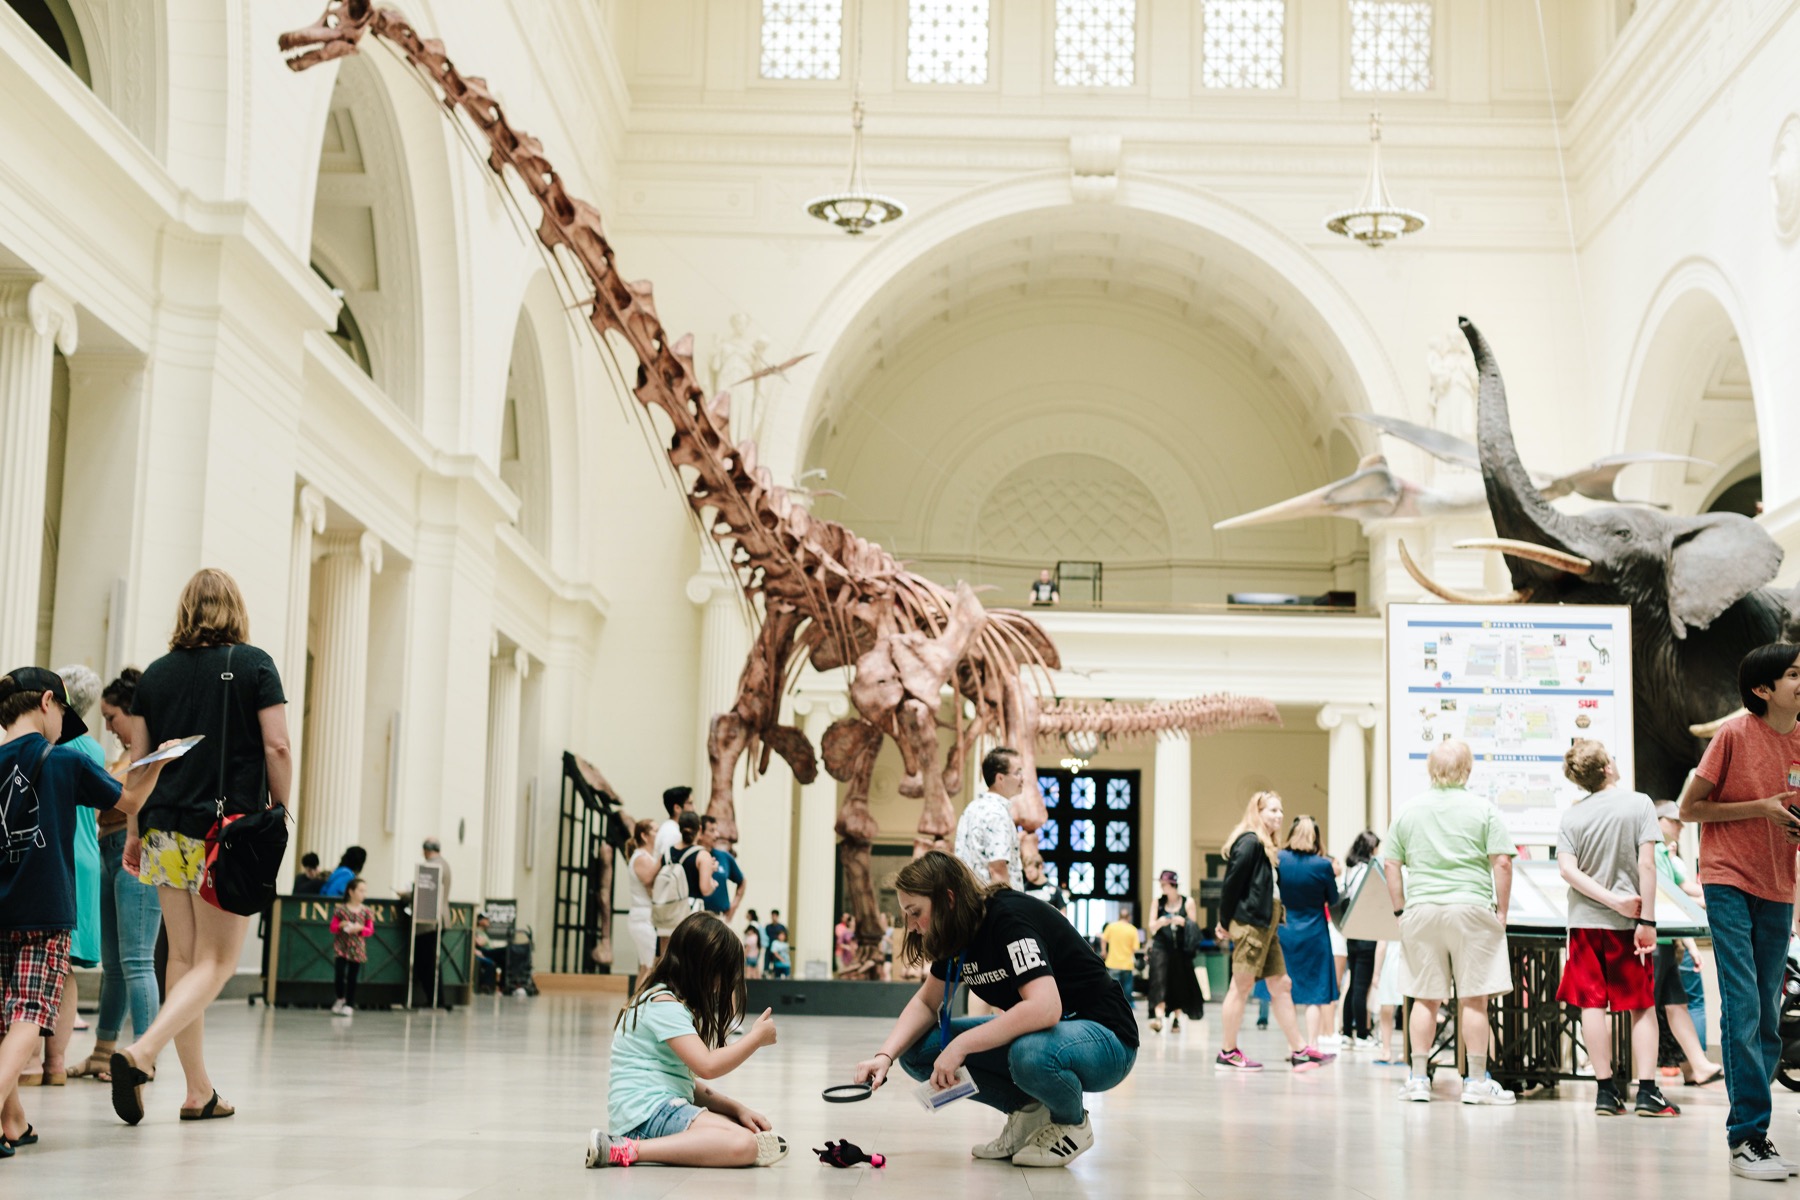 Big things are happening at Chicago’s Field Museum of Natural History